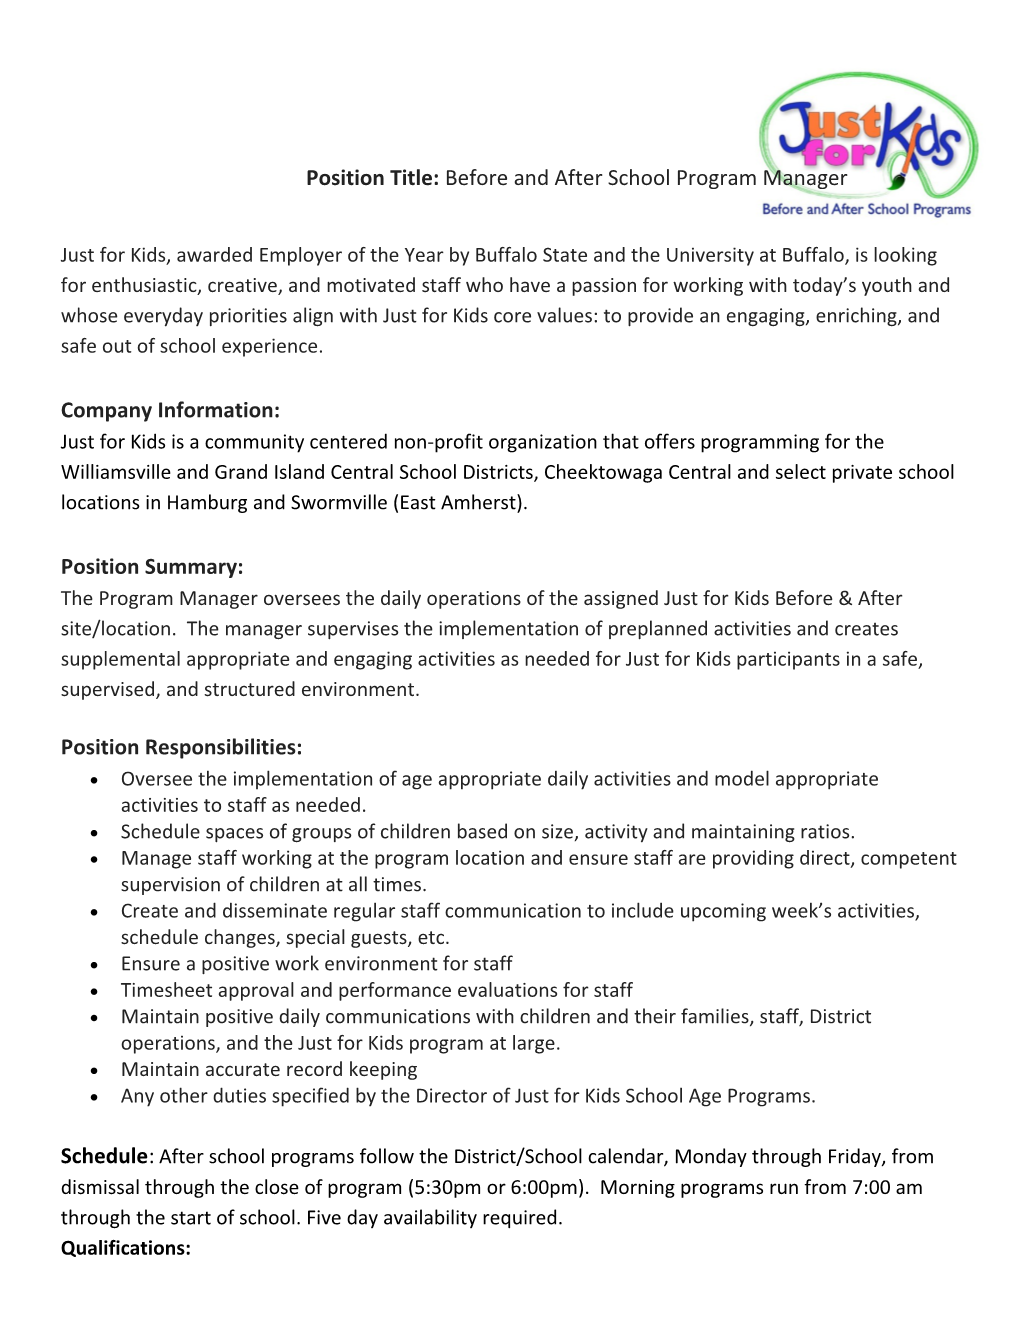 Position Title: Before and After School Program Manager